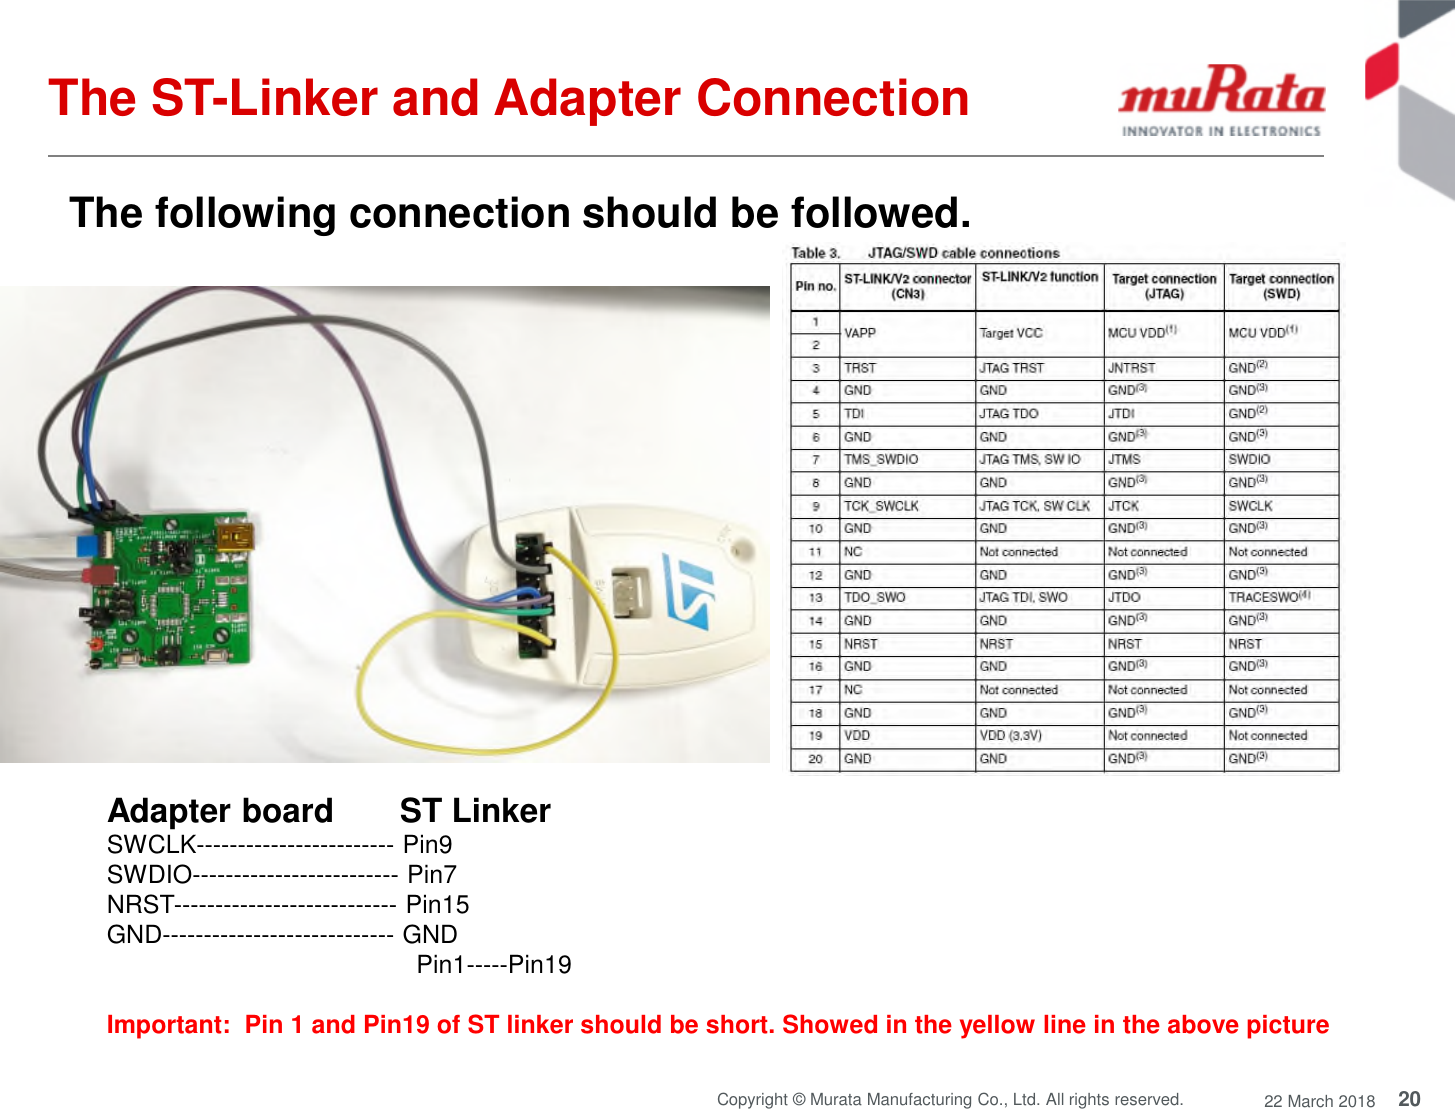 20Copyright © Murata Manufacturing Co., Ltd. All rights reserved. 22 March 2018The ST-Linker and Adapter ConnectionThe following connection should be followed.Adapter board ST LinkerSWCLK------------------------ Pin9SWDIO------------------------- Pin7NRST--------------------------- Pin15GND---------------------------- GNDPin1-----Pin19Important: Pin 1 and Pin19 of ST linker should be short. Showed in the yellow line in the above picture